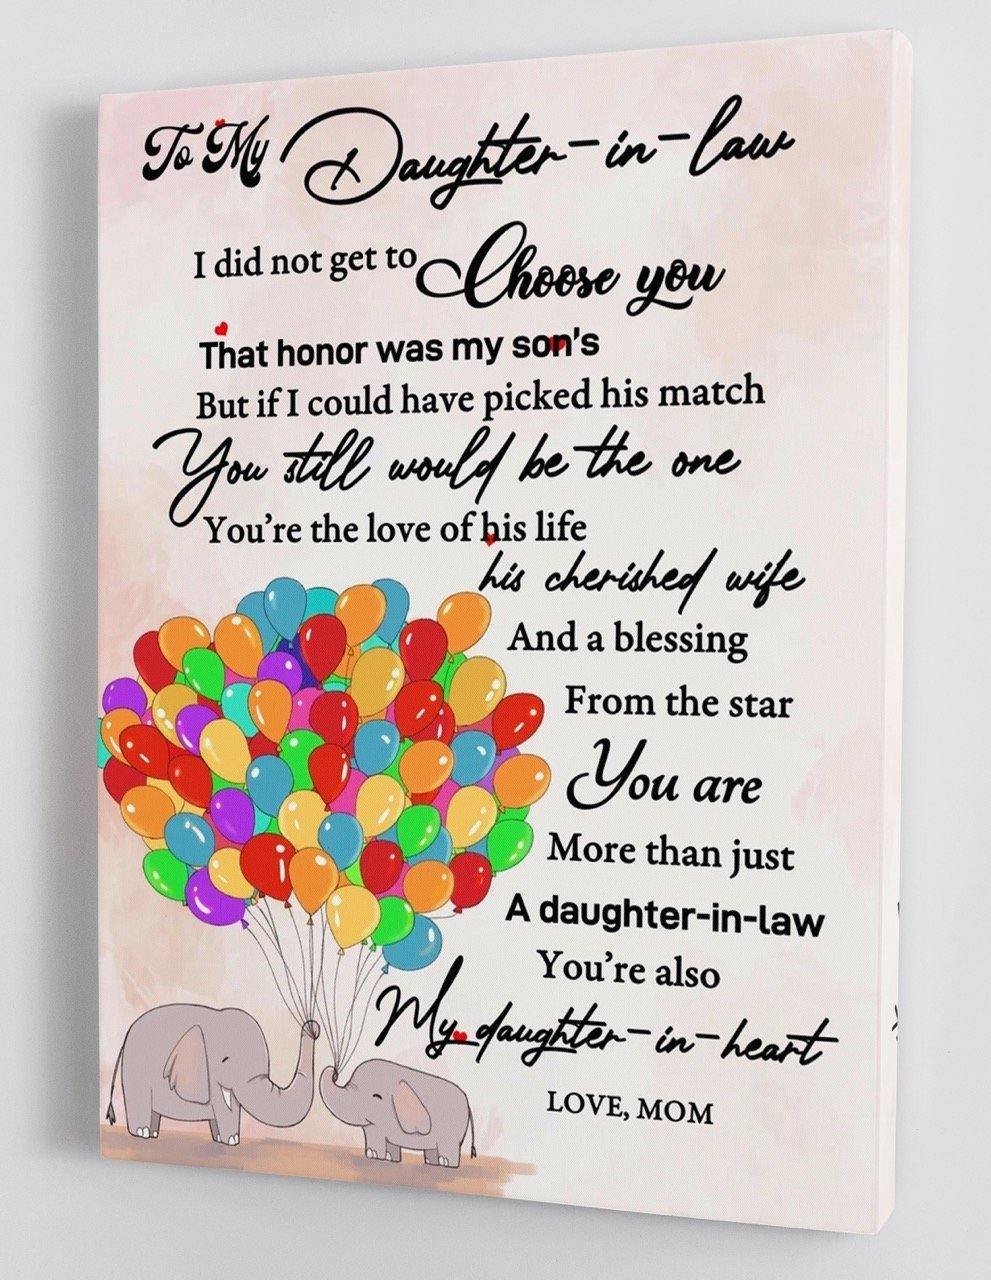 To My Daughter-in-law - From Mom - Framed Canvas Gift MD027 - DivesArt LLC